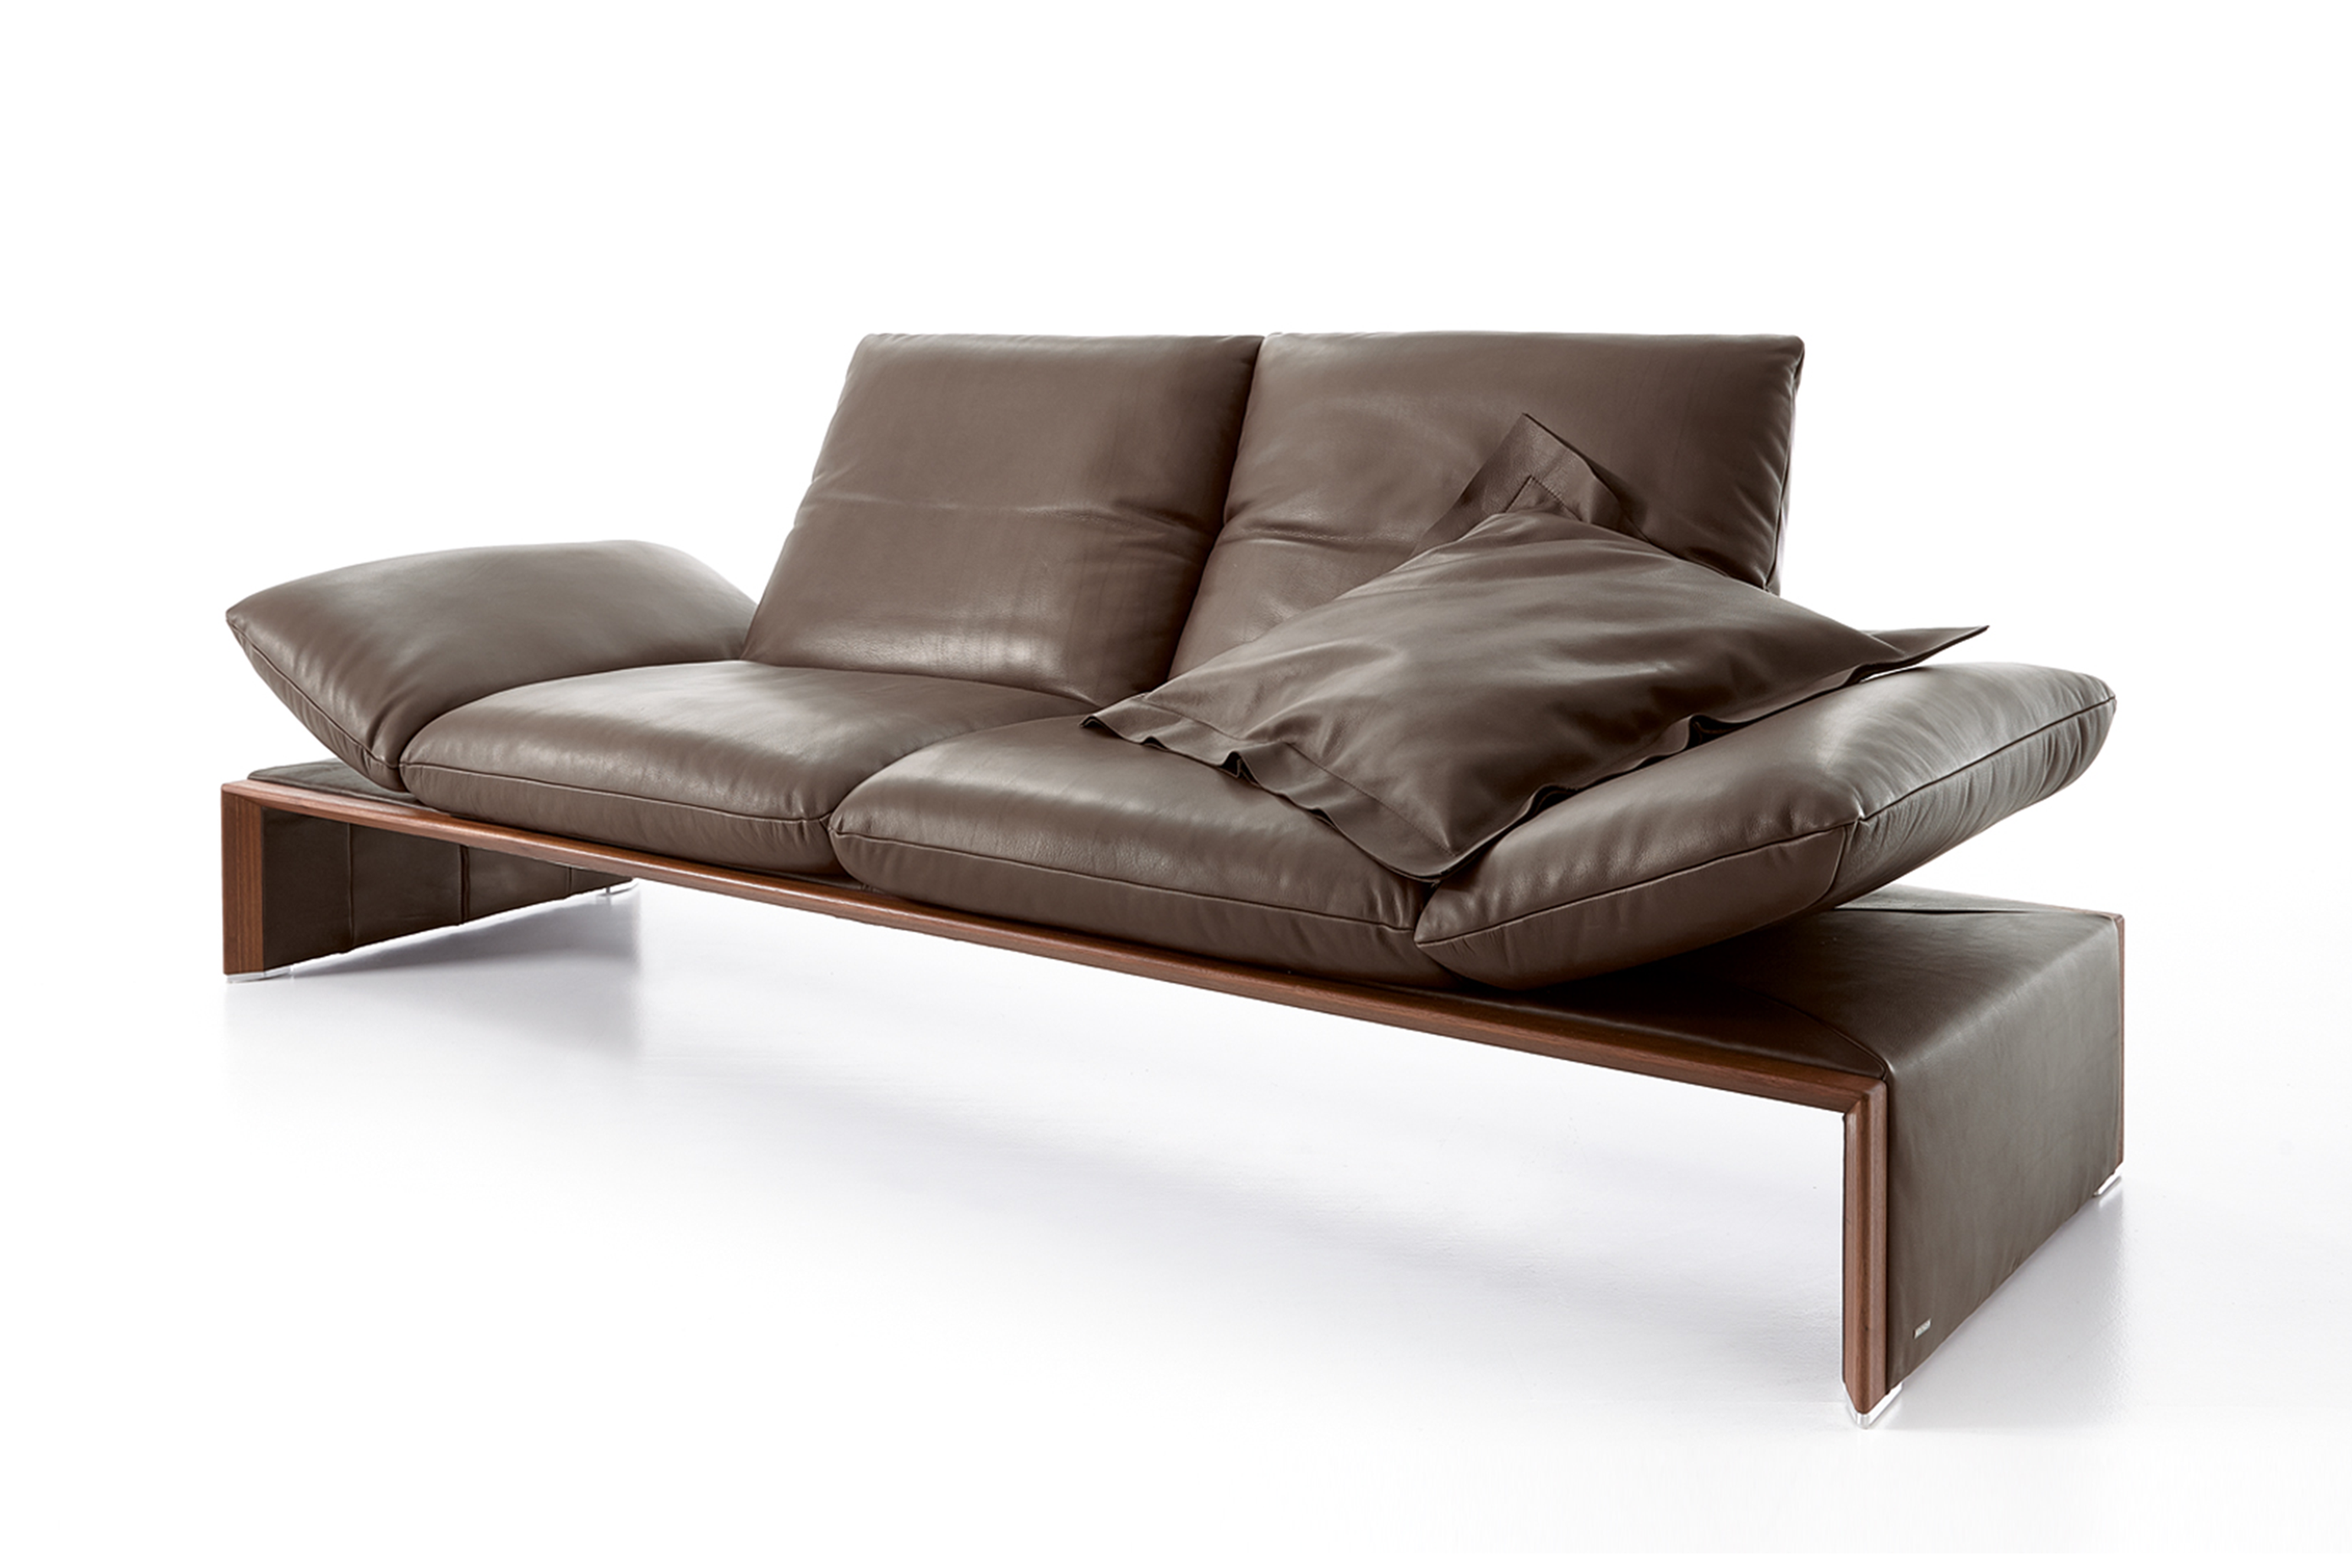 HARRIET 2 Seater Sofa in Leather by Koinor